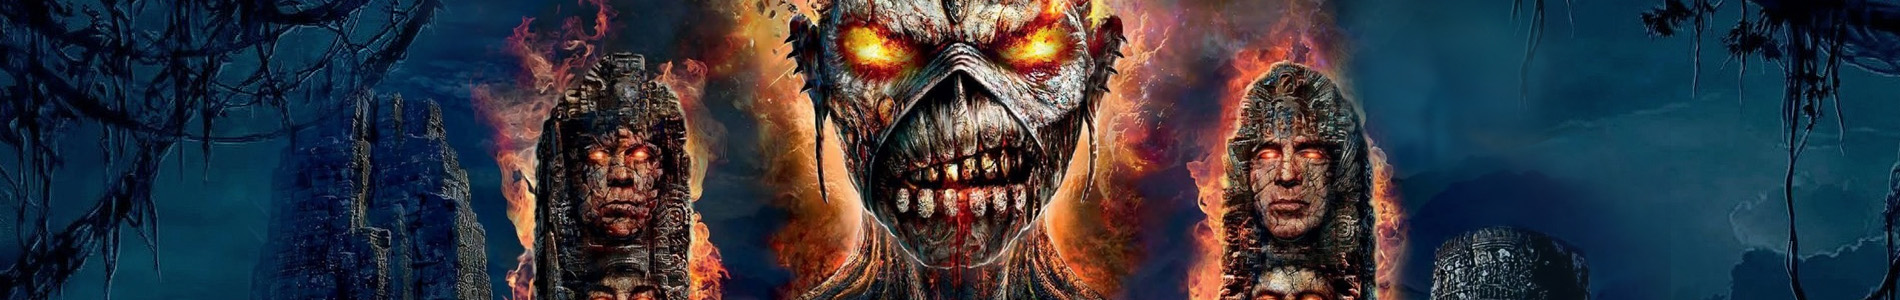 Maiden Announce 3 shows in Spain